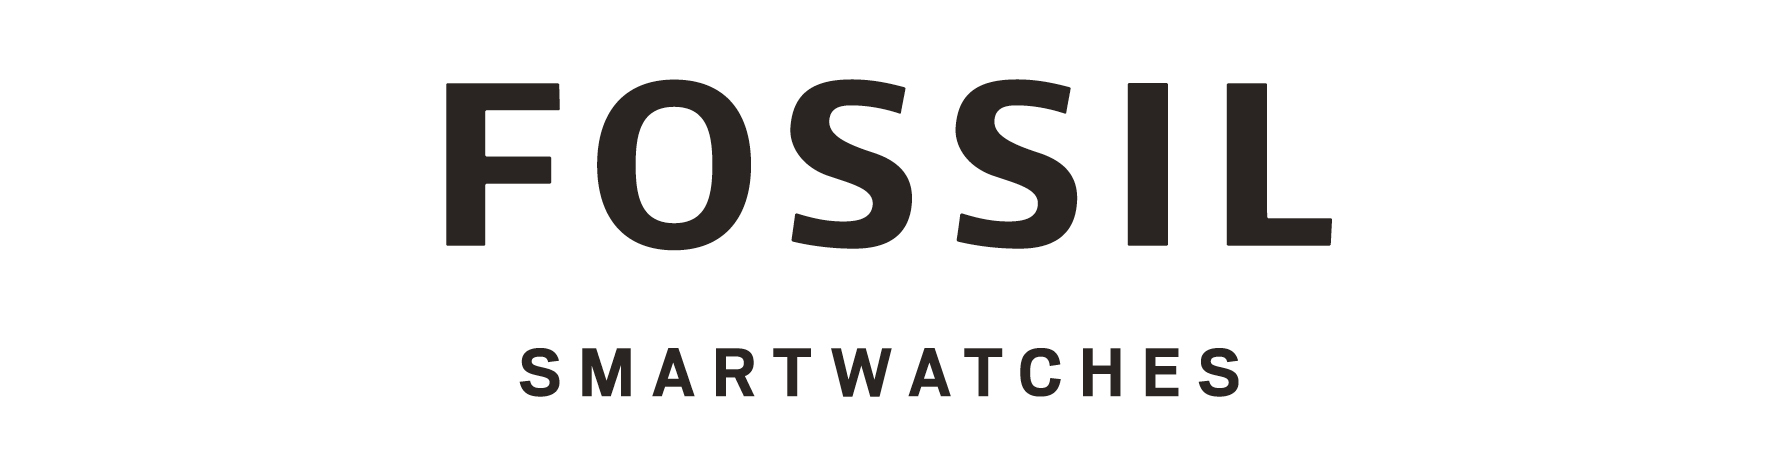 FOSSIL WEARABLES